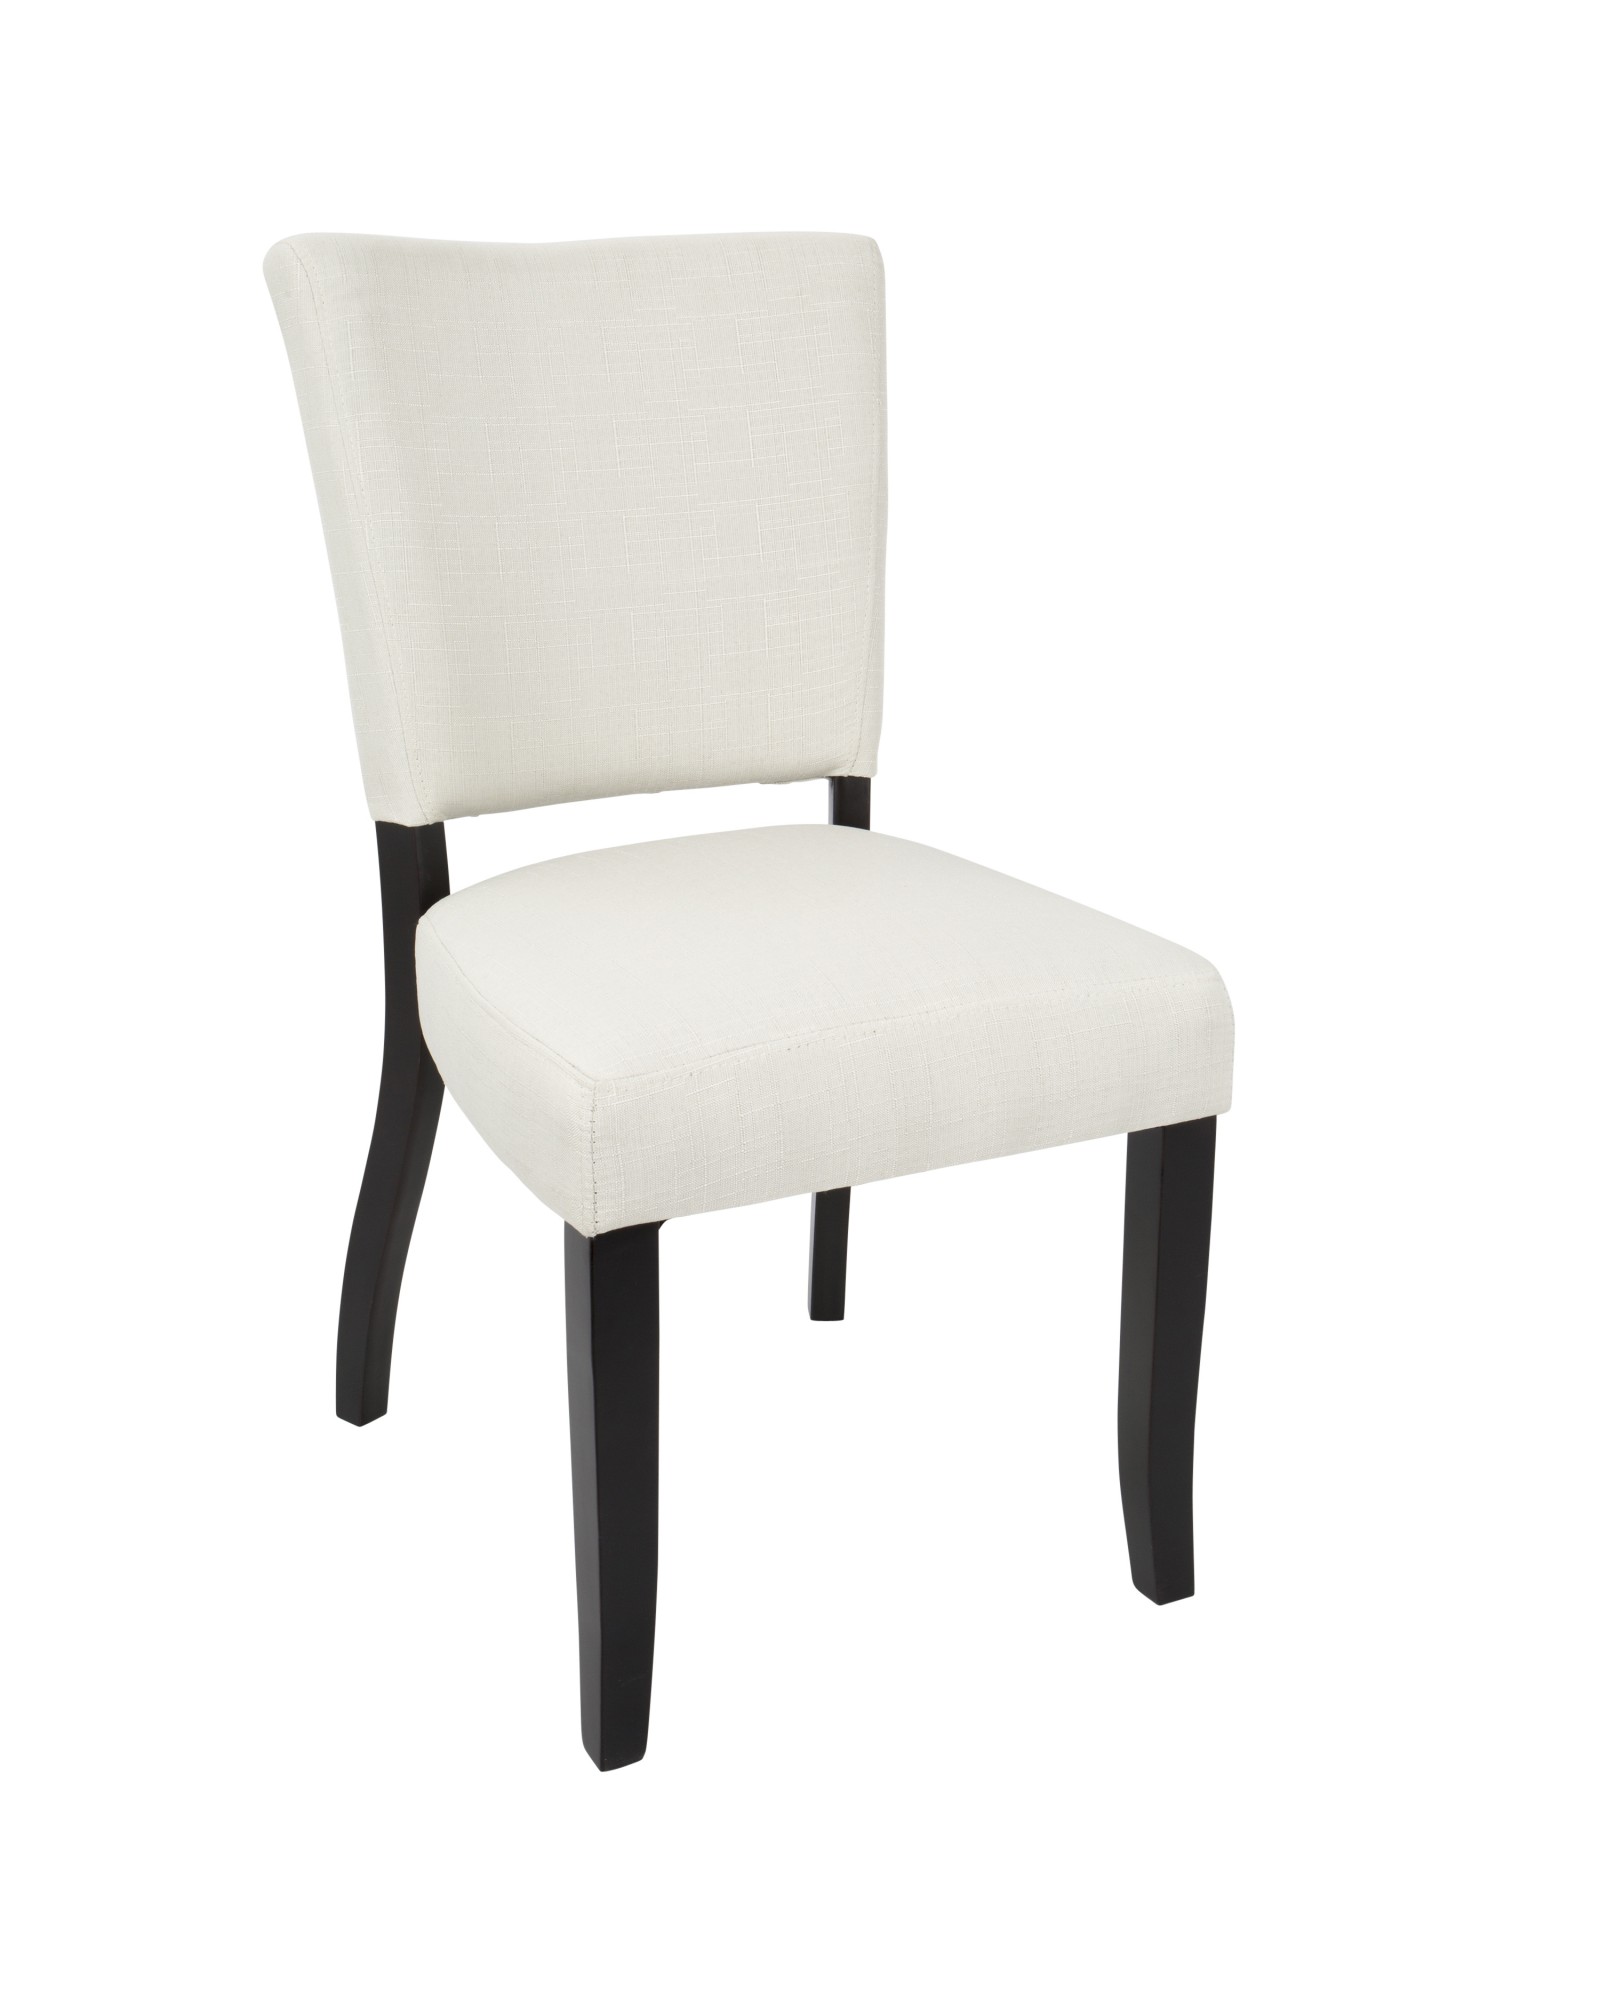 Vida Contemporary Dining Chair with Nailhead Trim in Espresso and Cream - Set of 2